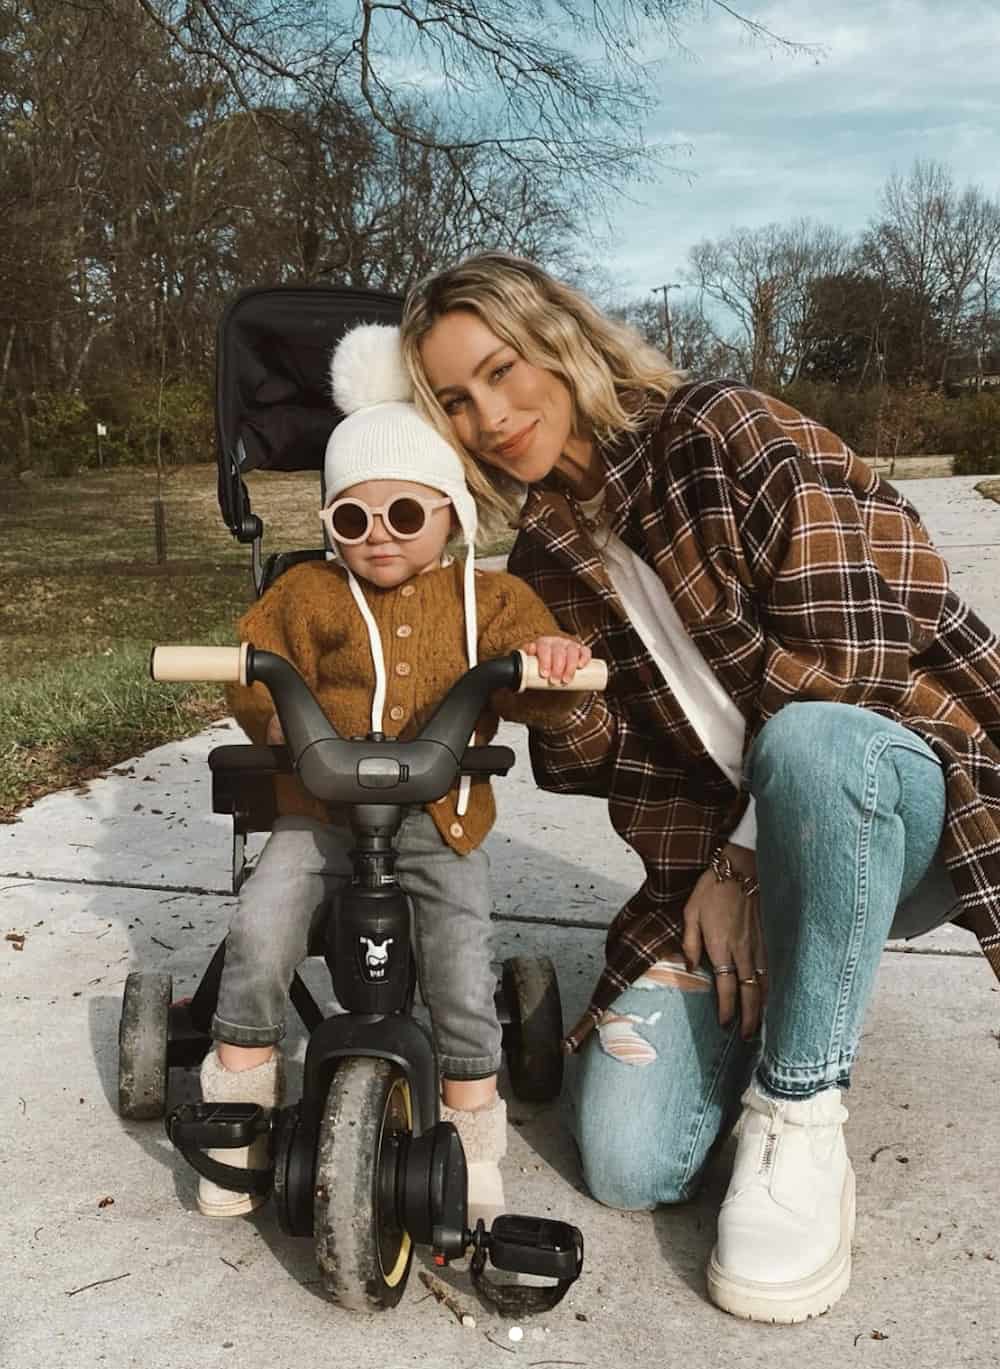 image of a mom leaning over beside her child on a kids bike, wearing a plaid over-shirt, jeans, and white sneakers